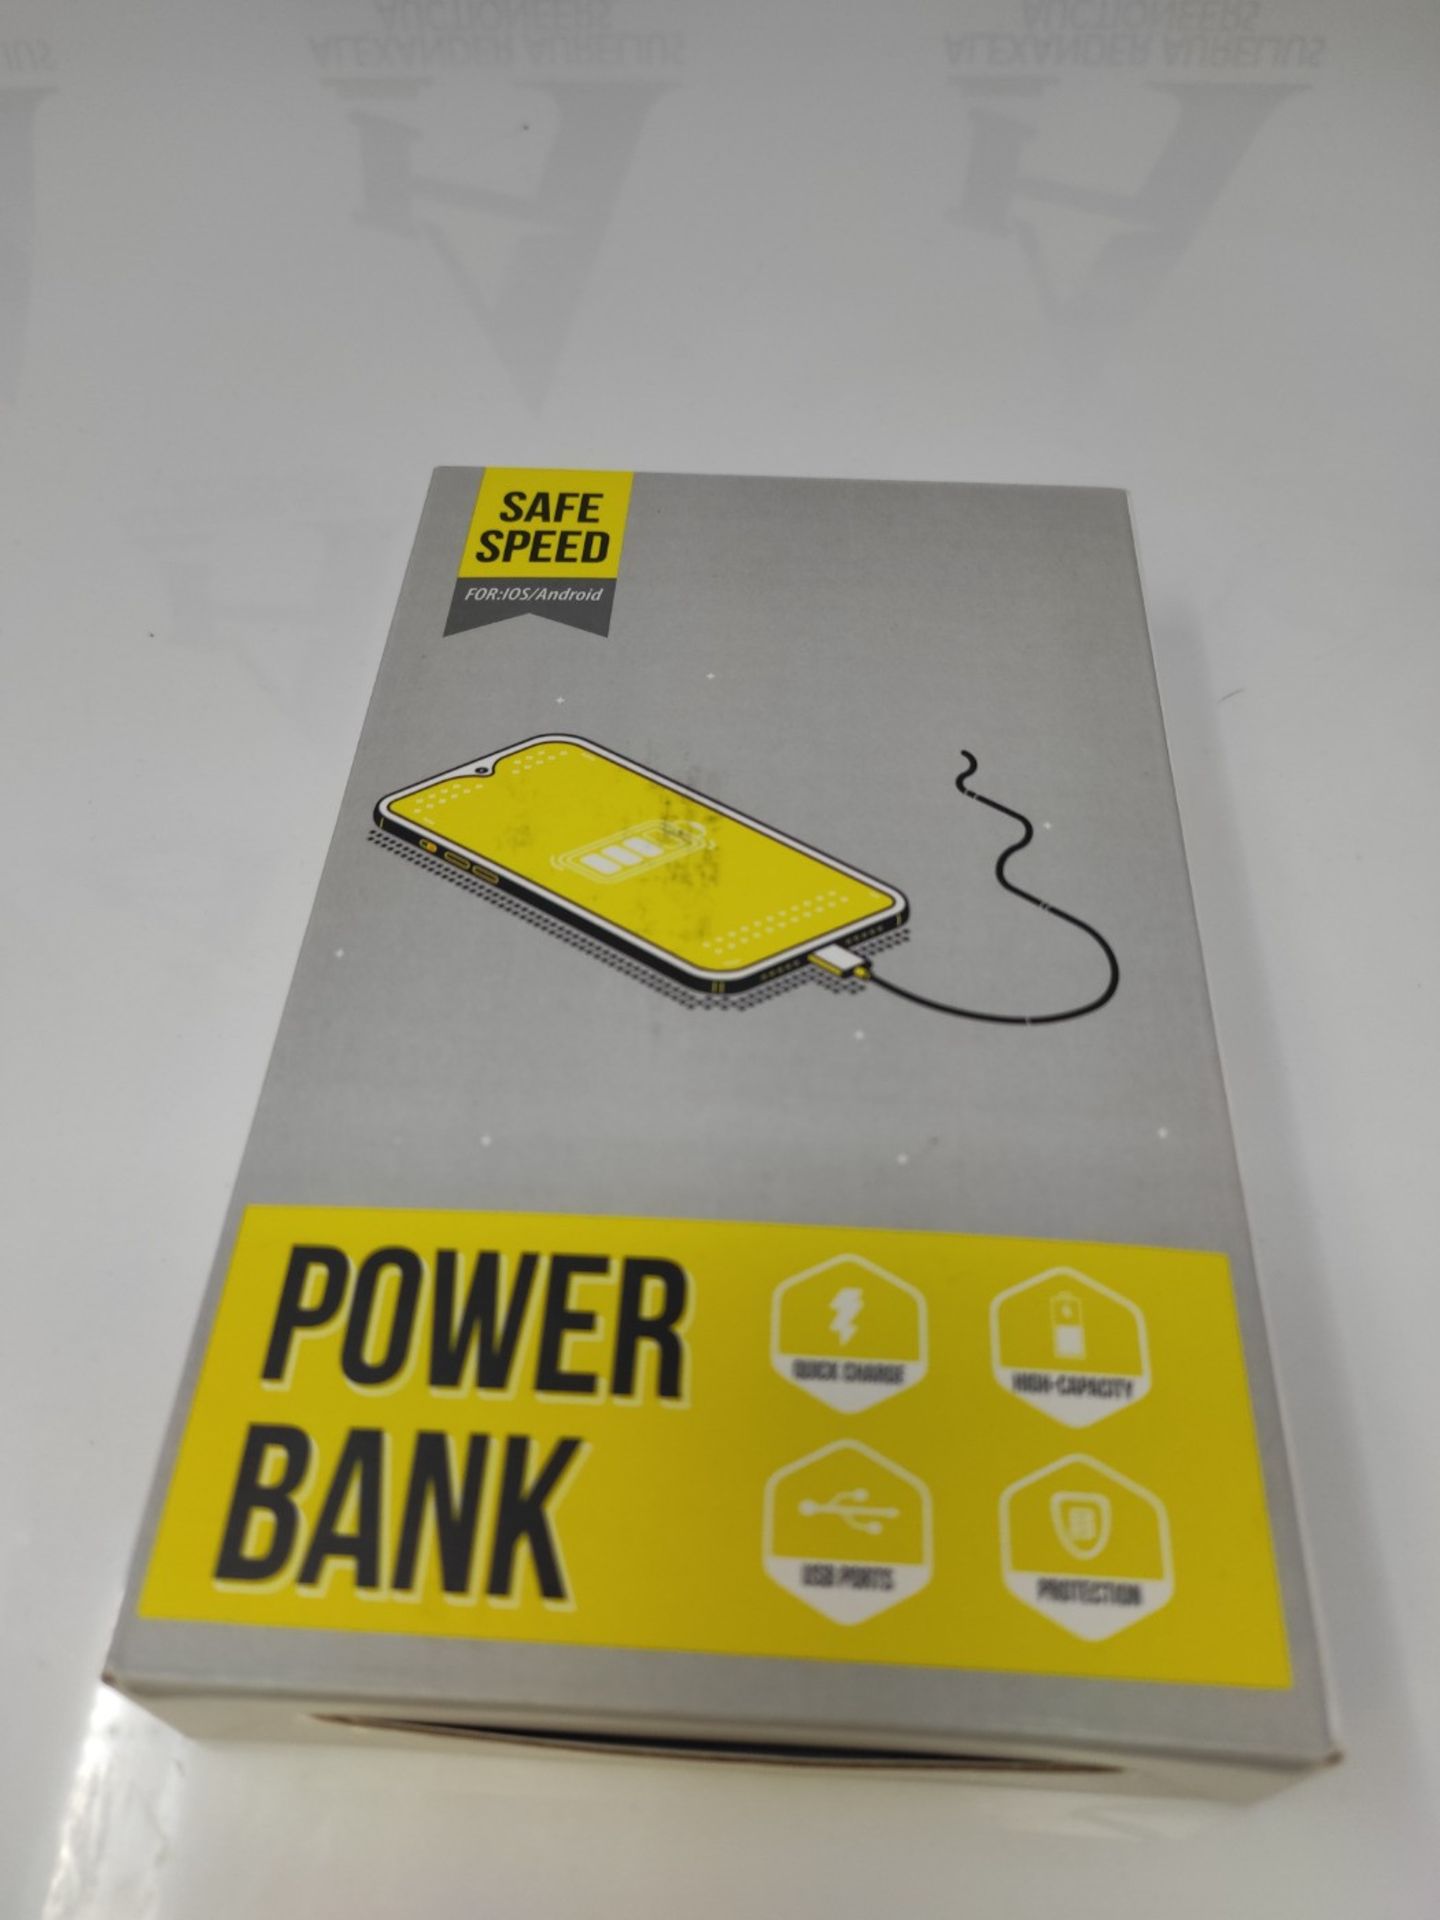 Solar Powerbank 30000mAh External Battery: Power Bank Mobile Outdoor Portable Charger - Image 5 of 6